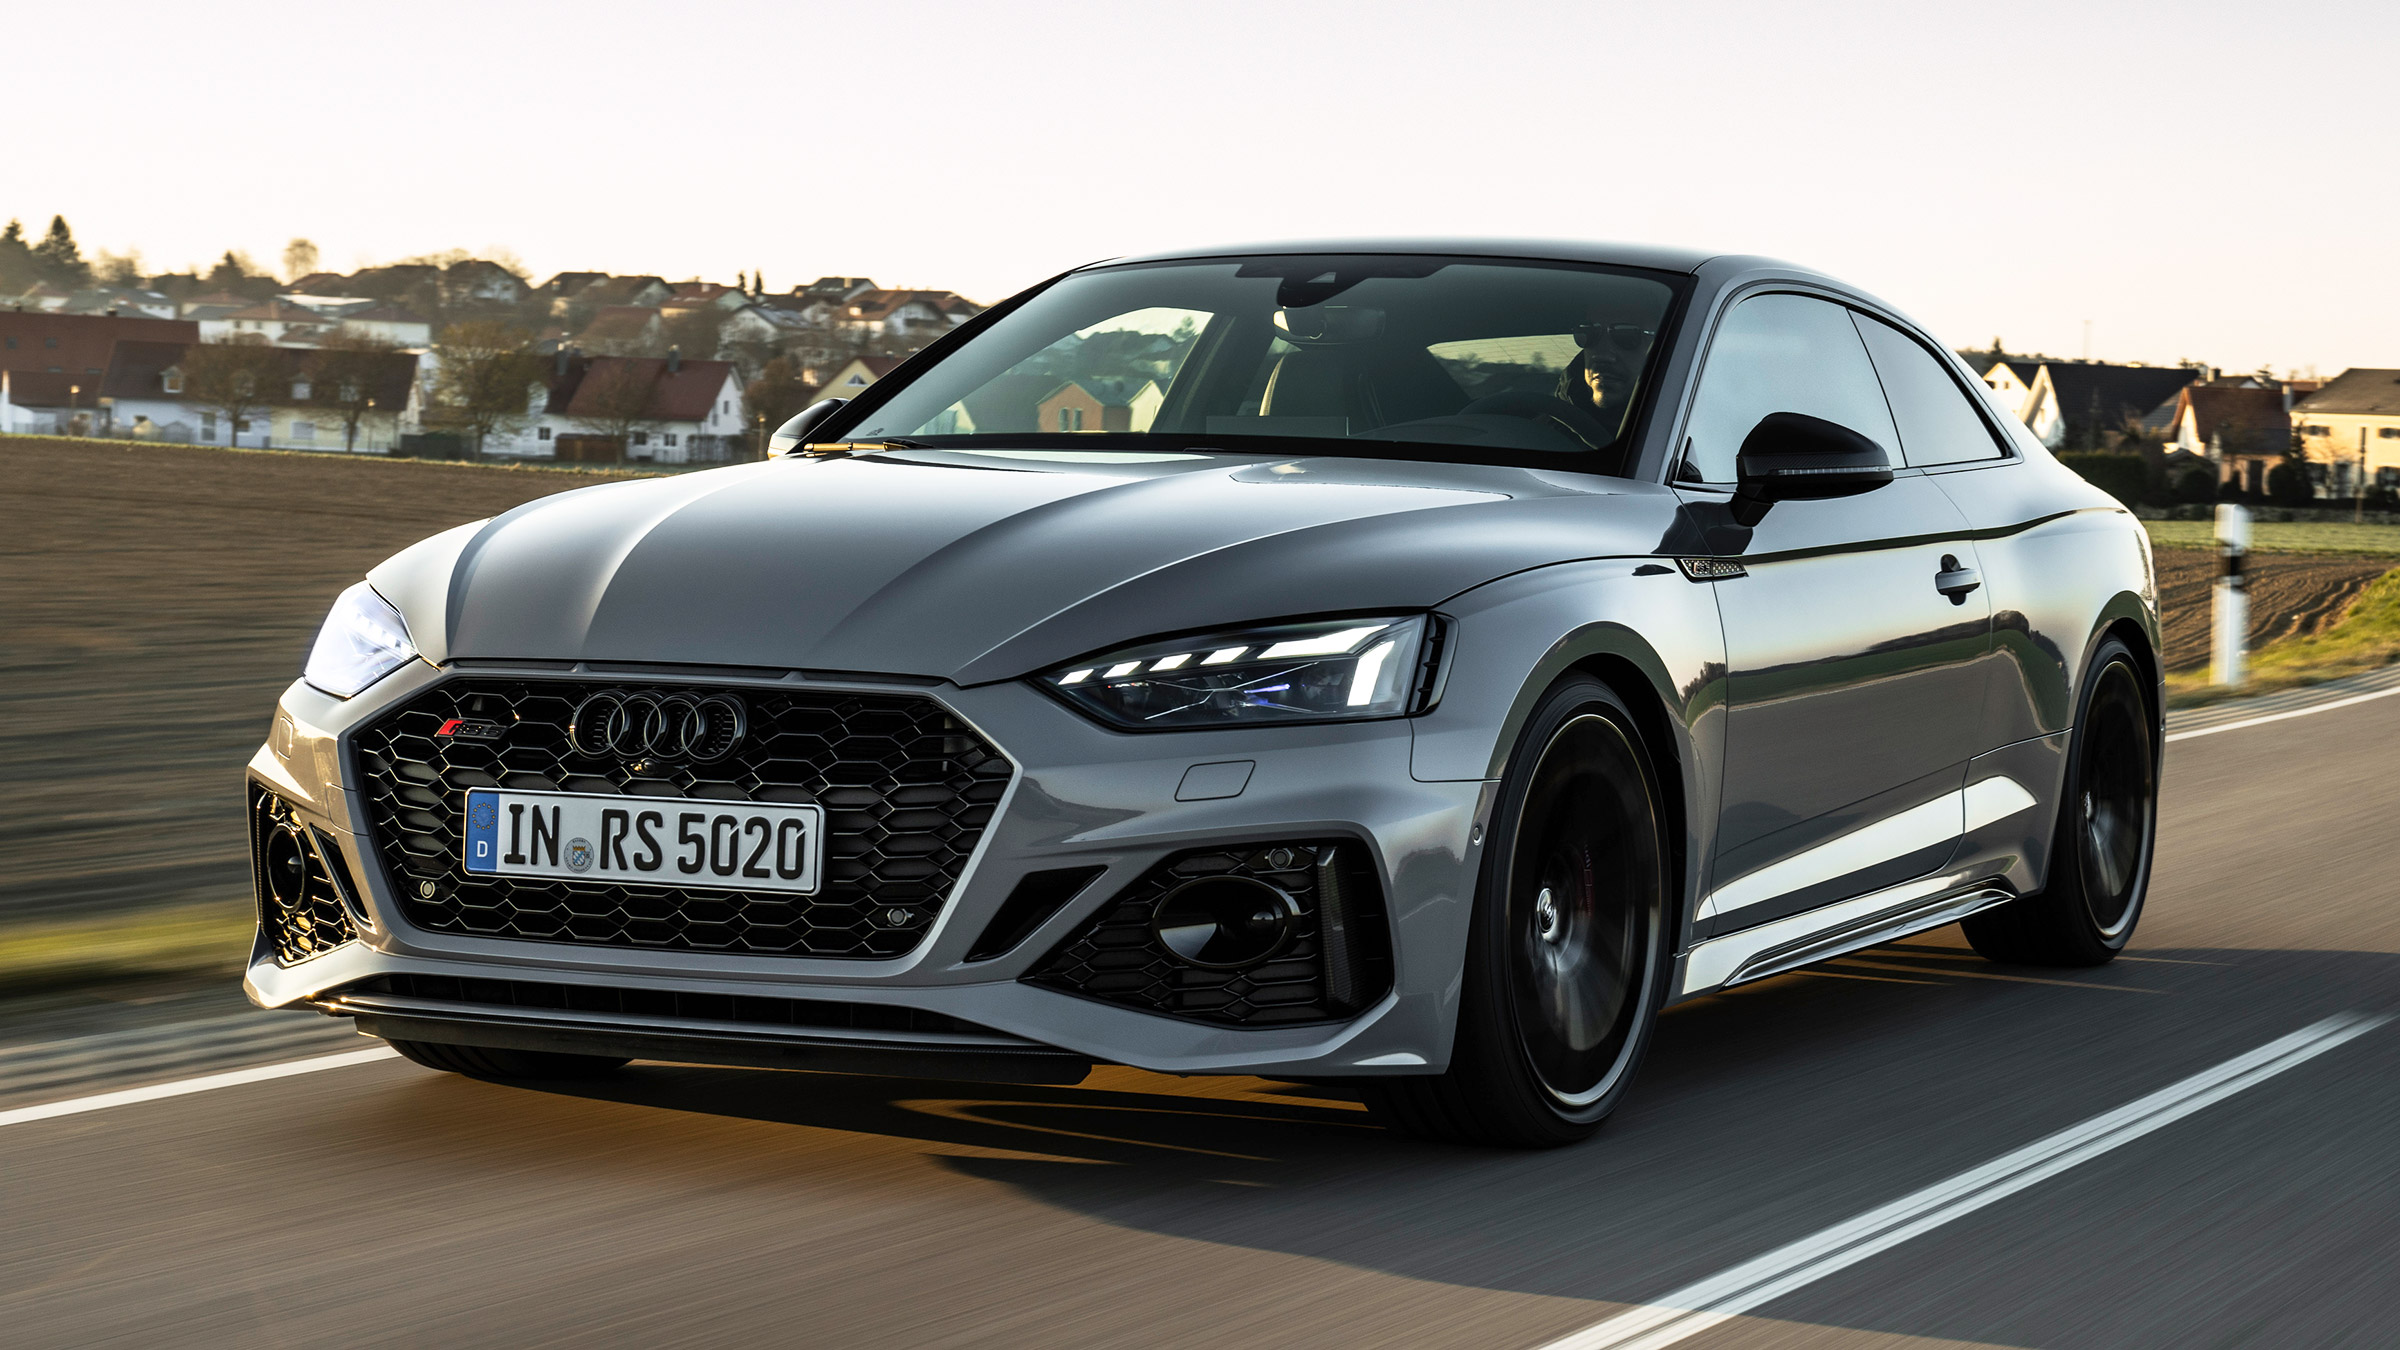 New Audi RS 5 Coupe 2020 review Automotive Daily